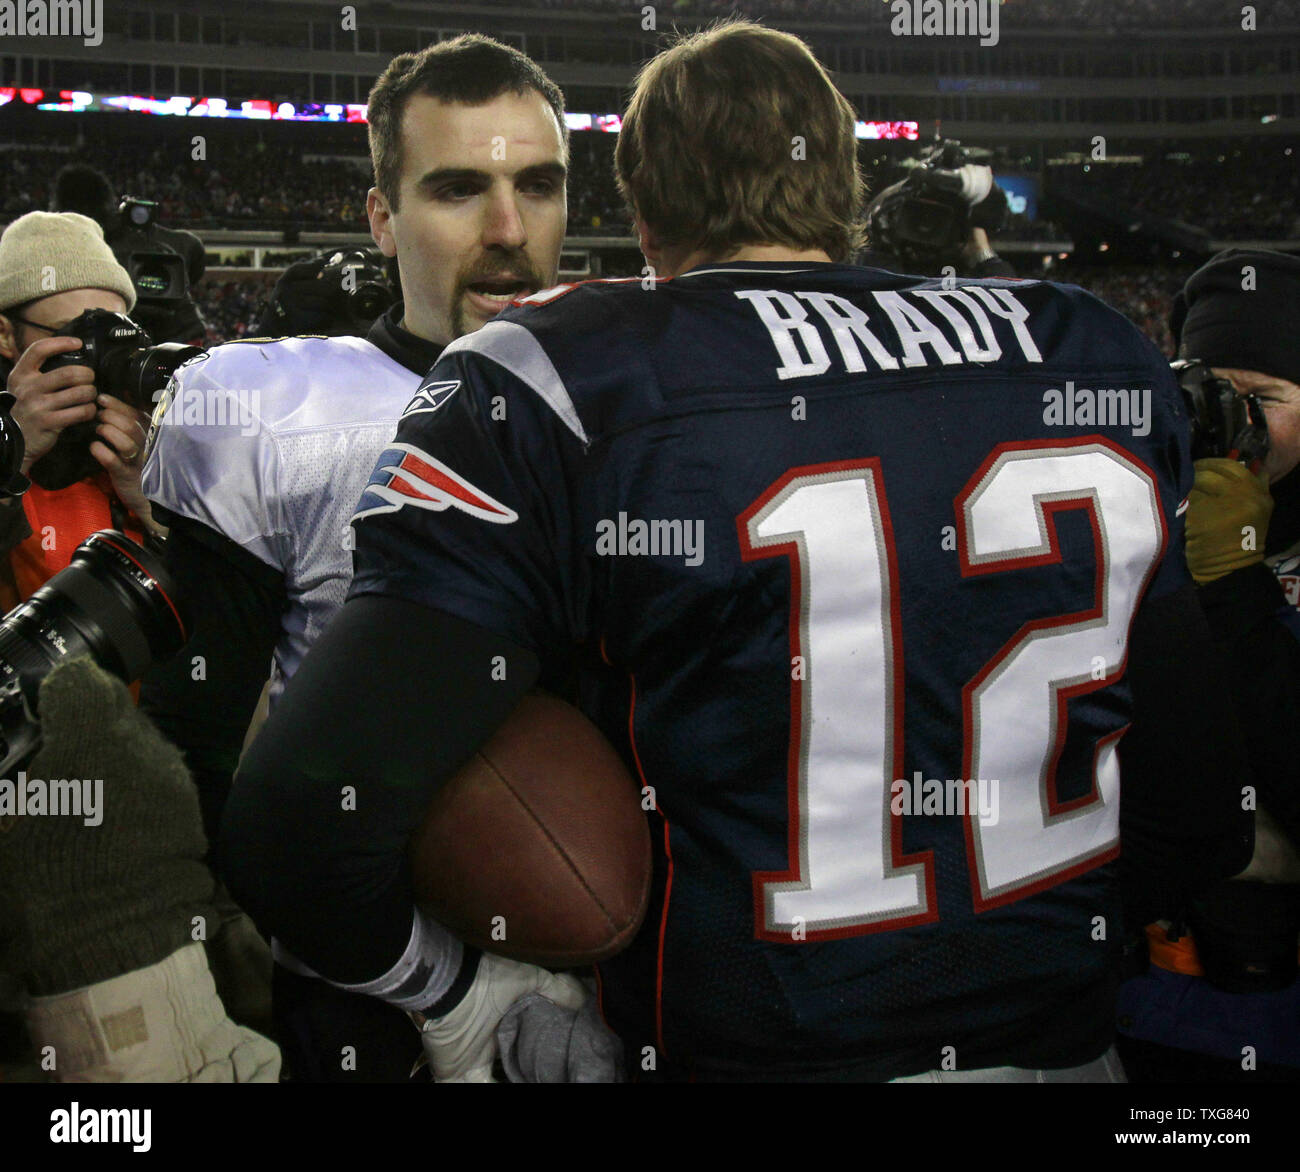 Baltimore Ravens quarterback Joe Flacco (L) shakes hands with New England Patriots quarterback Tom Brady after the Patriots defeated the Ravens to take AFC Championship at Gillette Stadium in Foxboro, Massachusetts on January 22, 2012.   UPI/Matthew Healey Stock Photo